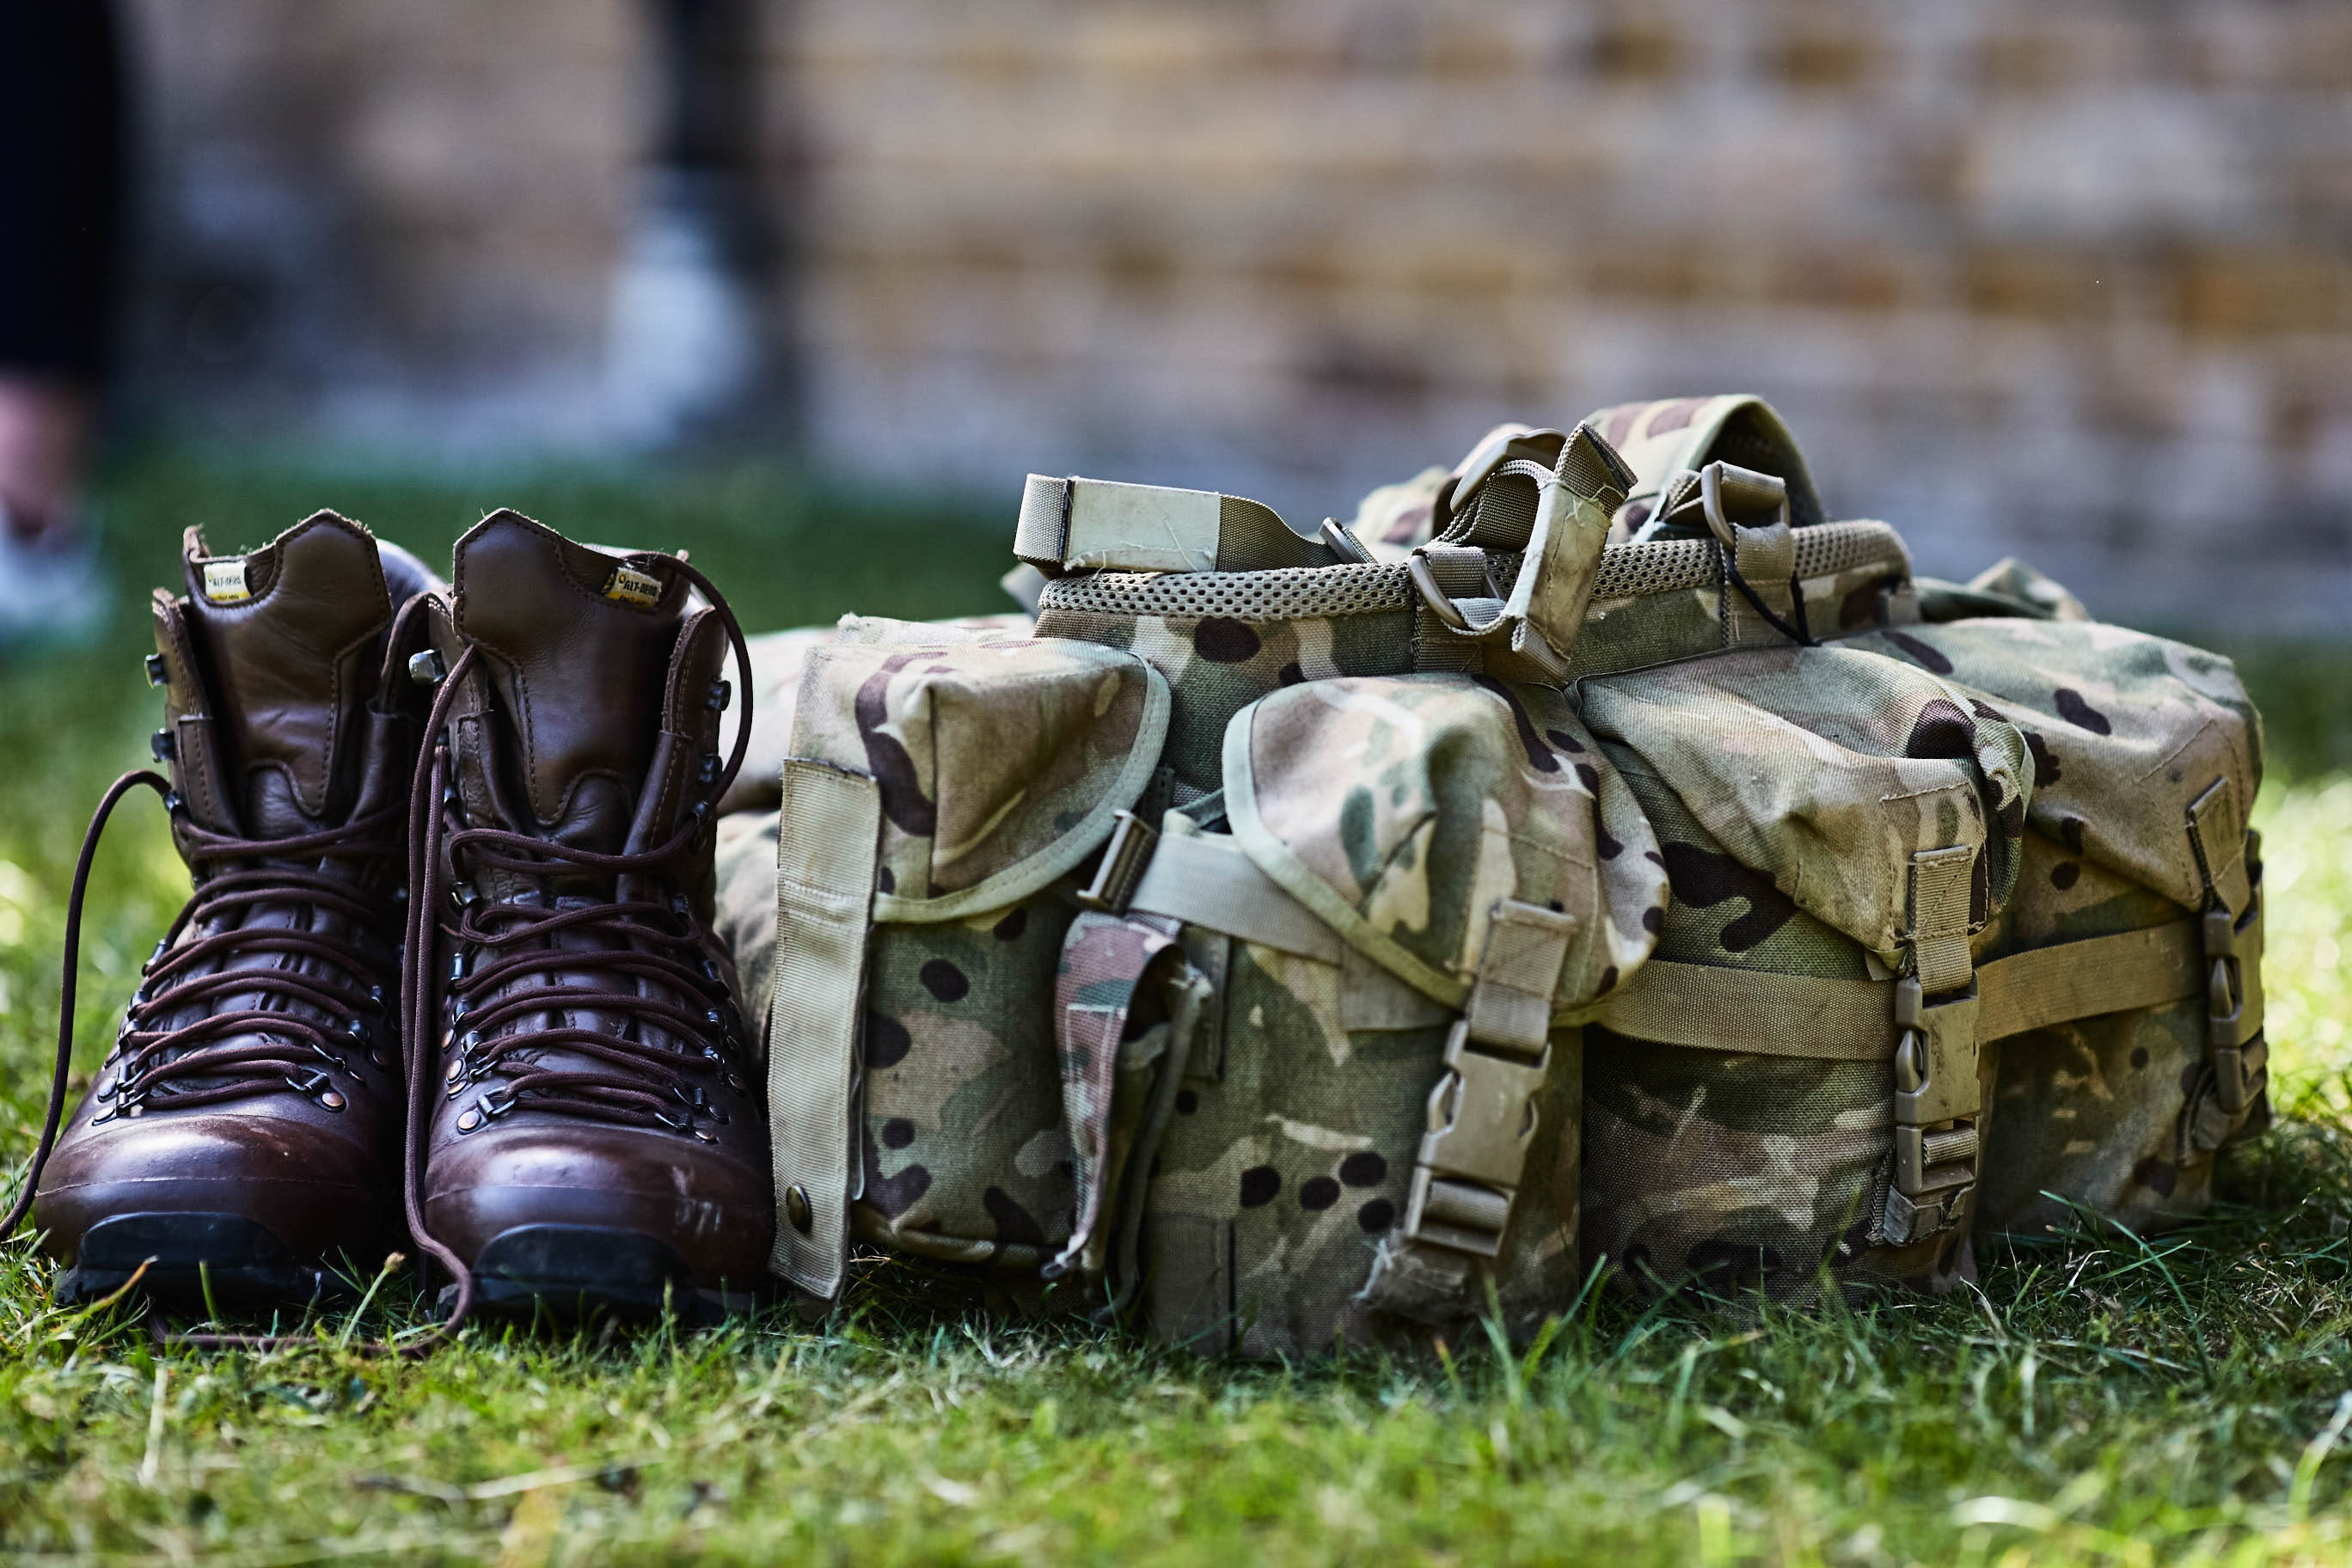 Military Kit Insurance provides cover for your forces issued equipment including your boots and uniform.